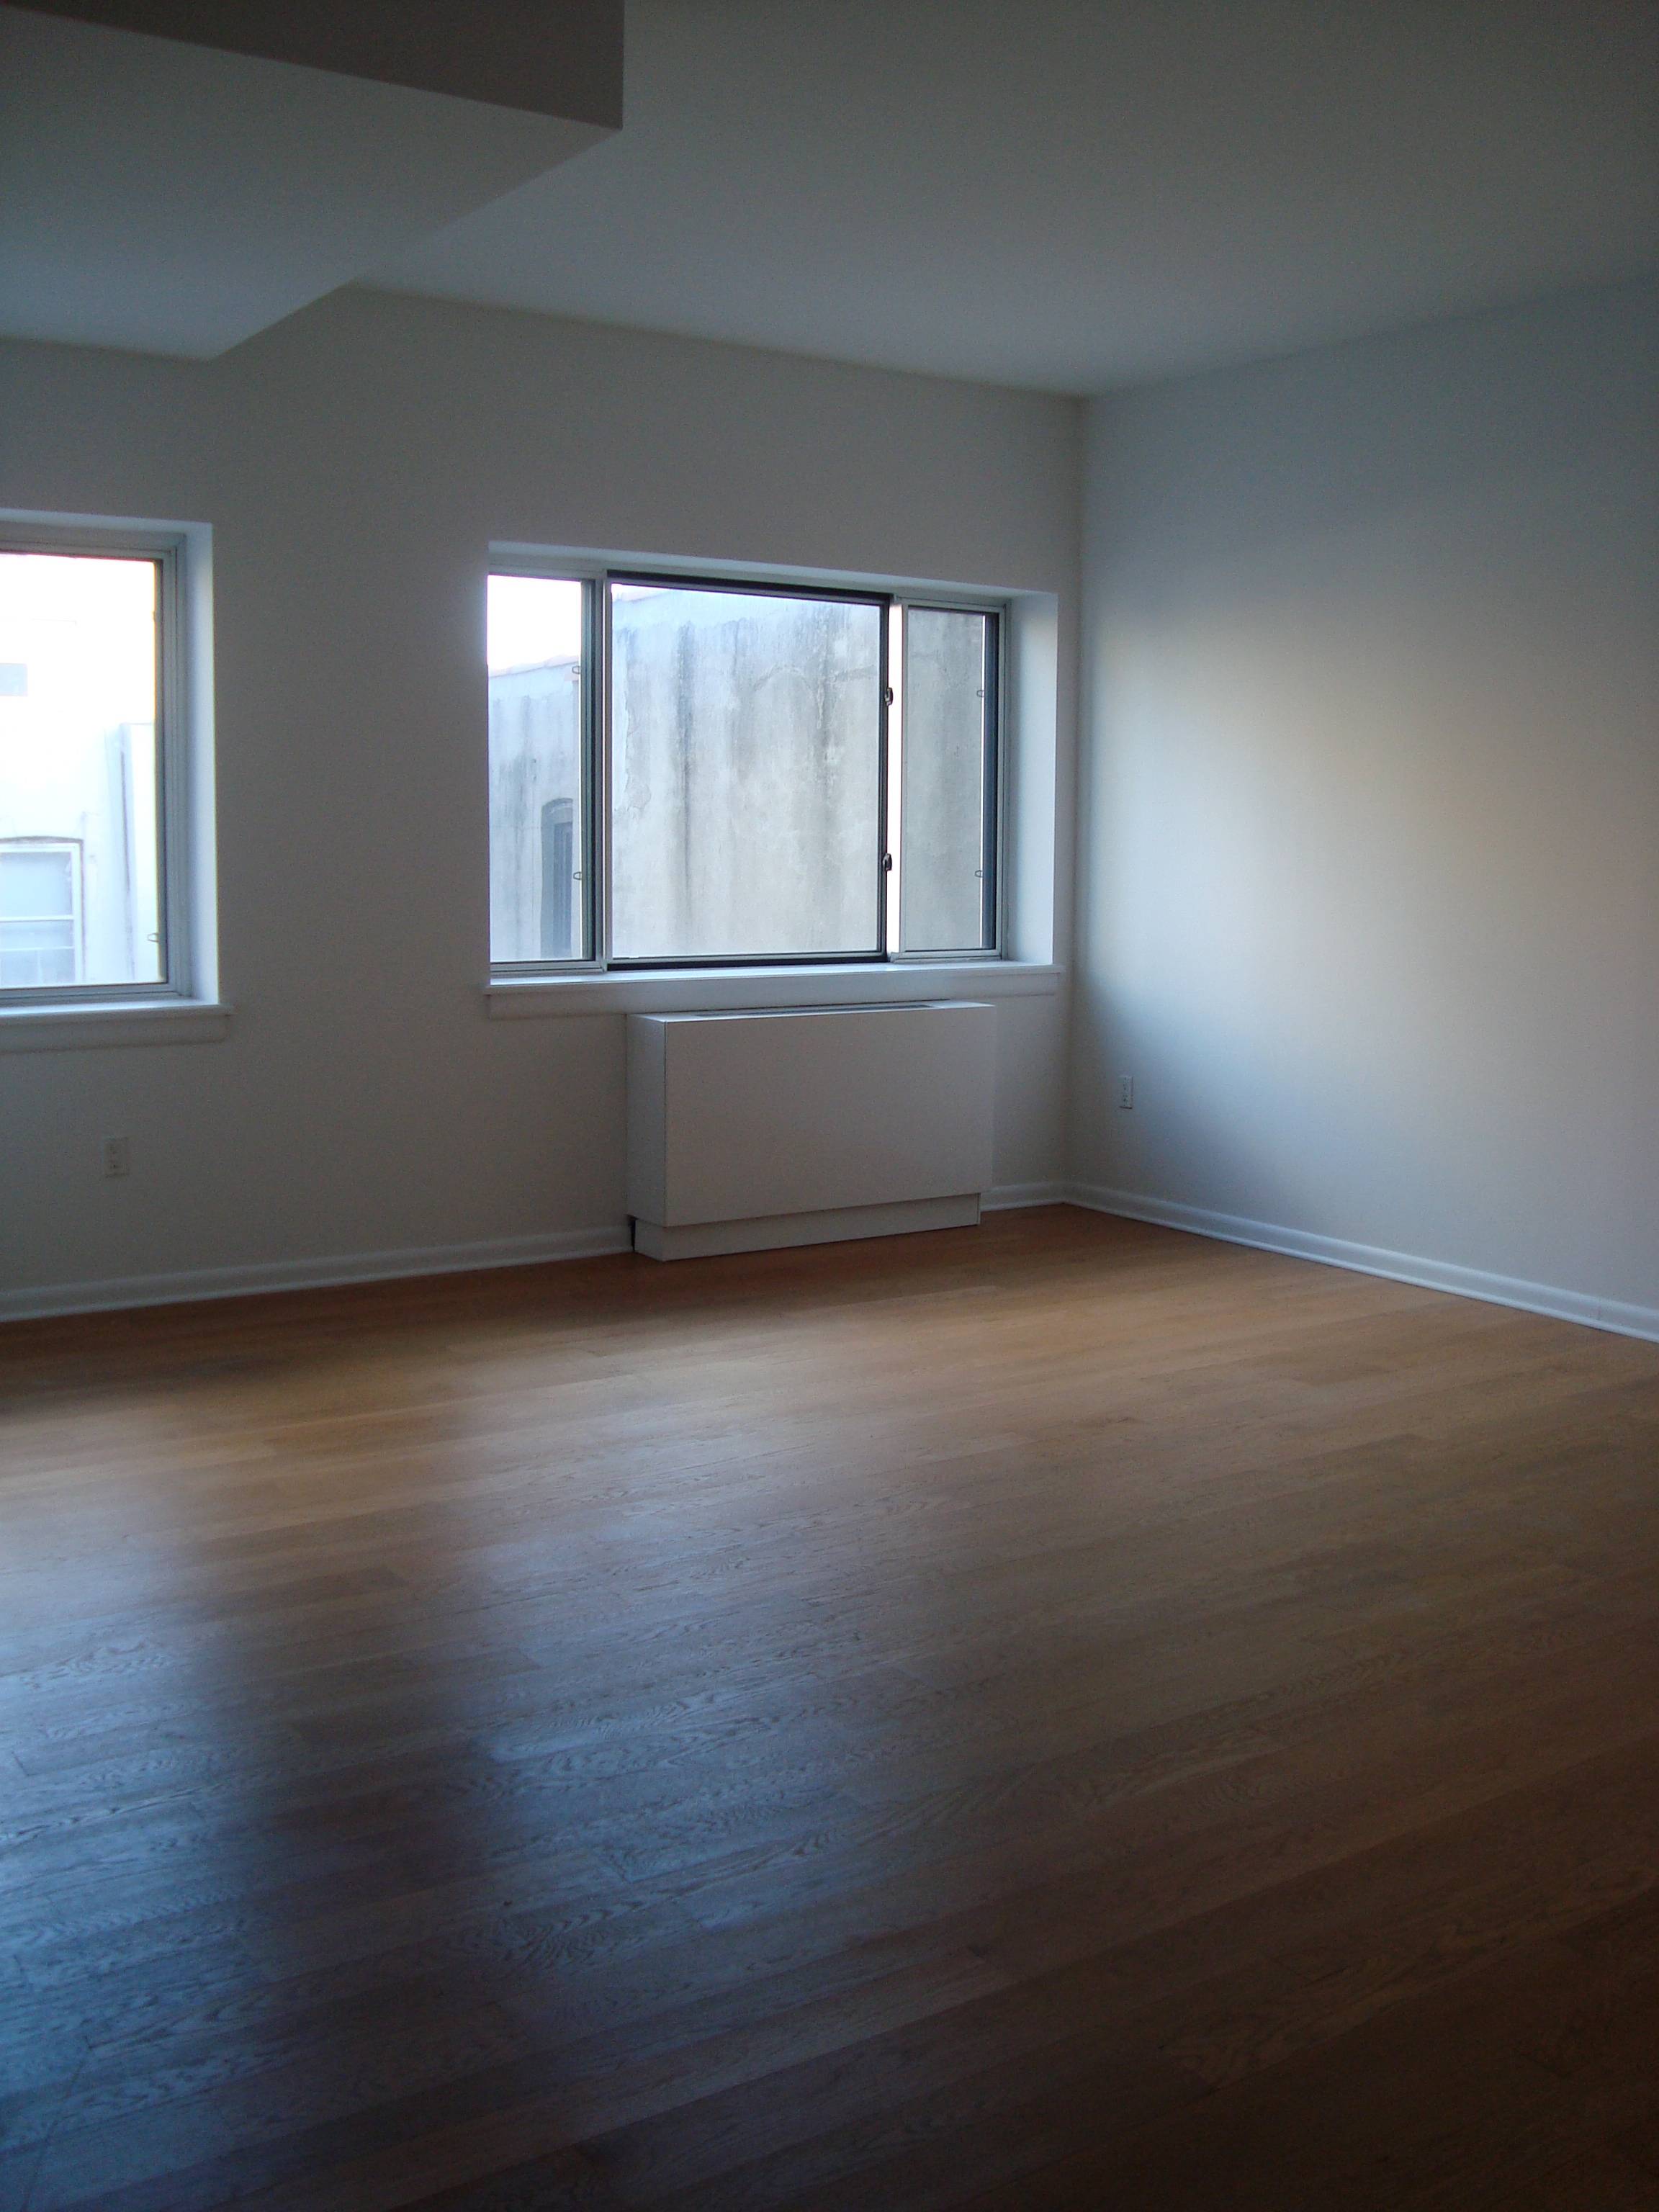 Harlem, 2283 Third Avenue, 2 Bedrooms and 2 Bathrooms